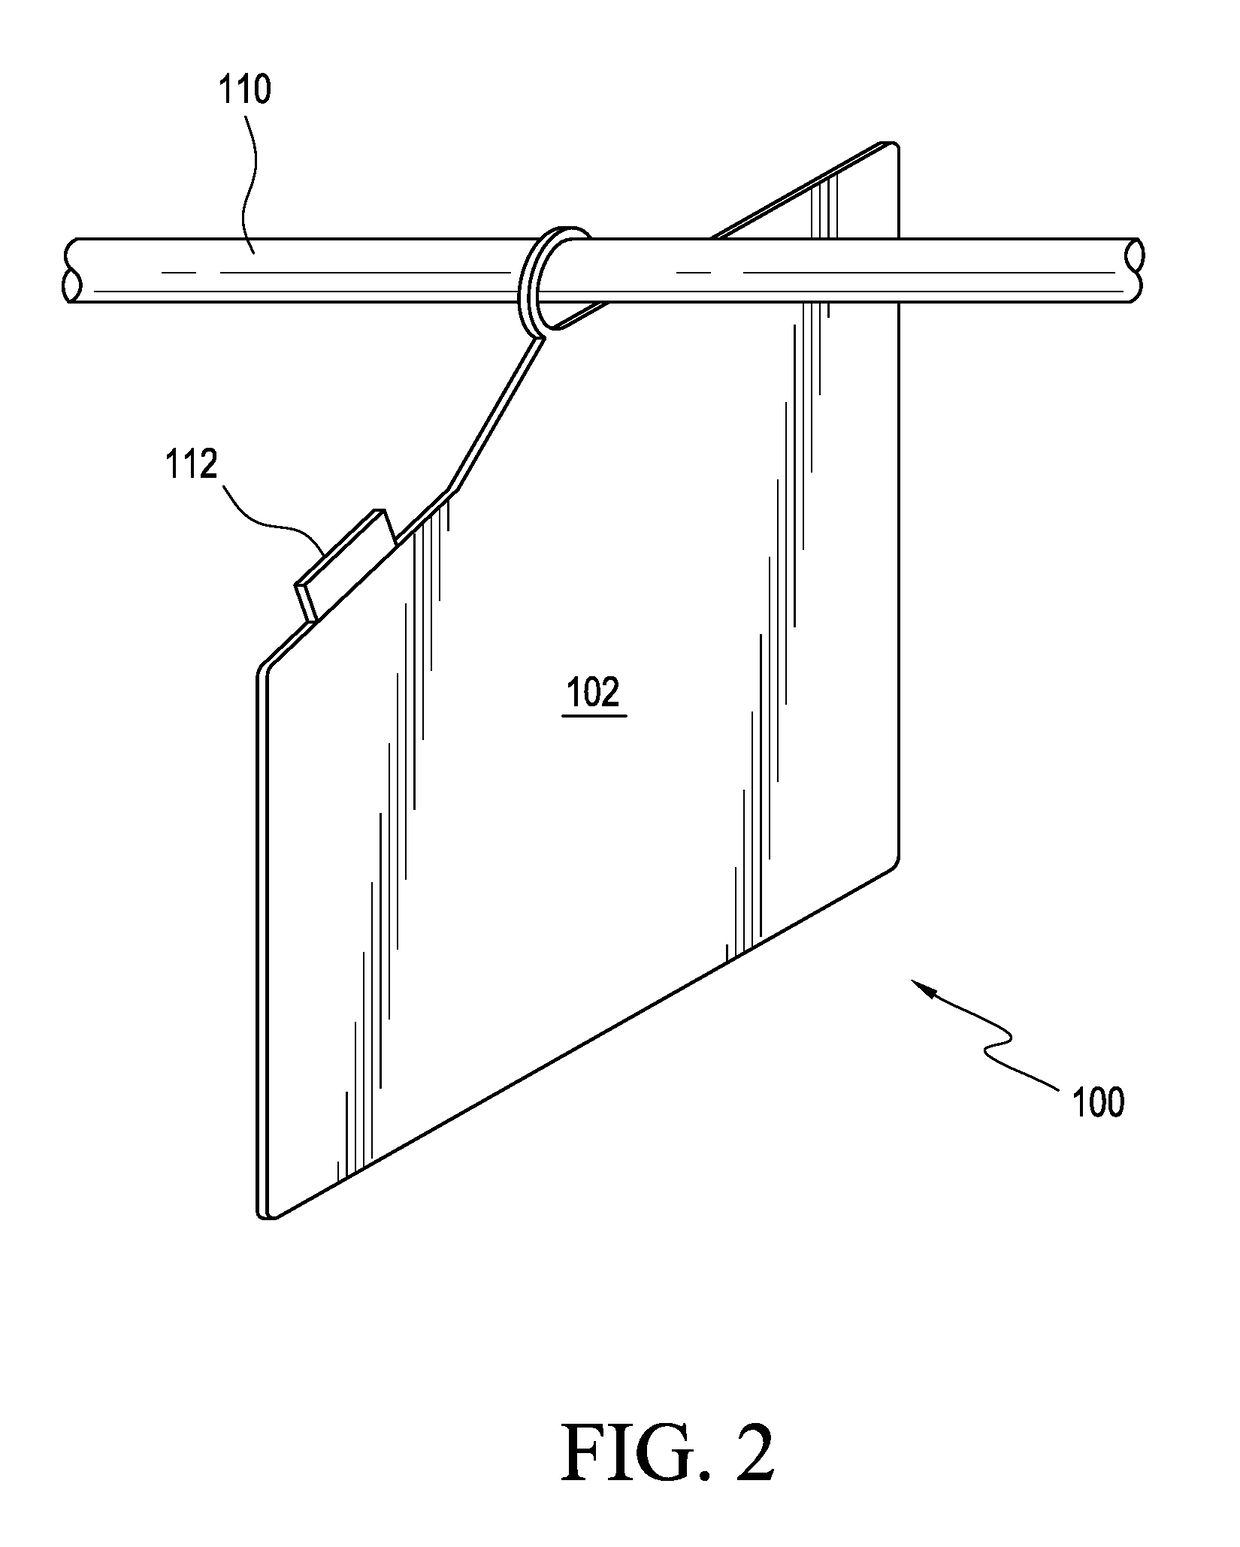 Hanging separator to be used for separating articles of clothing hanging in a clothes closet, and a plurality of hanging separators forming a system for separating articles of clothing hanging in a clothes closet